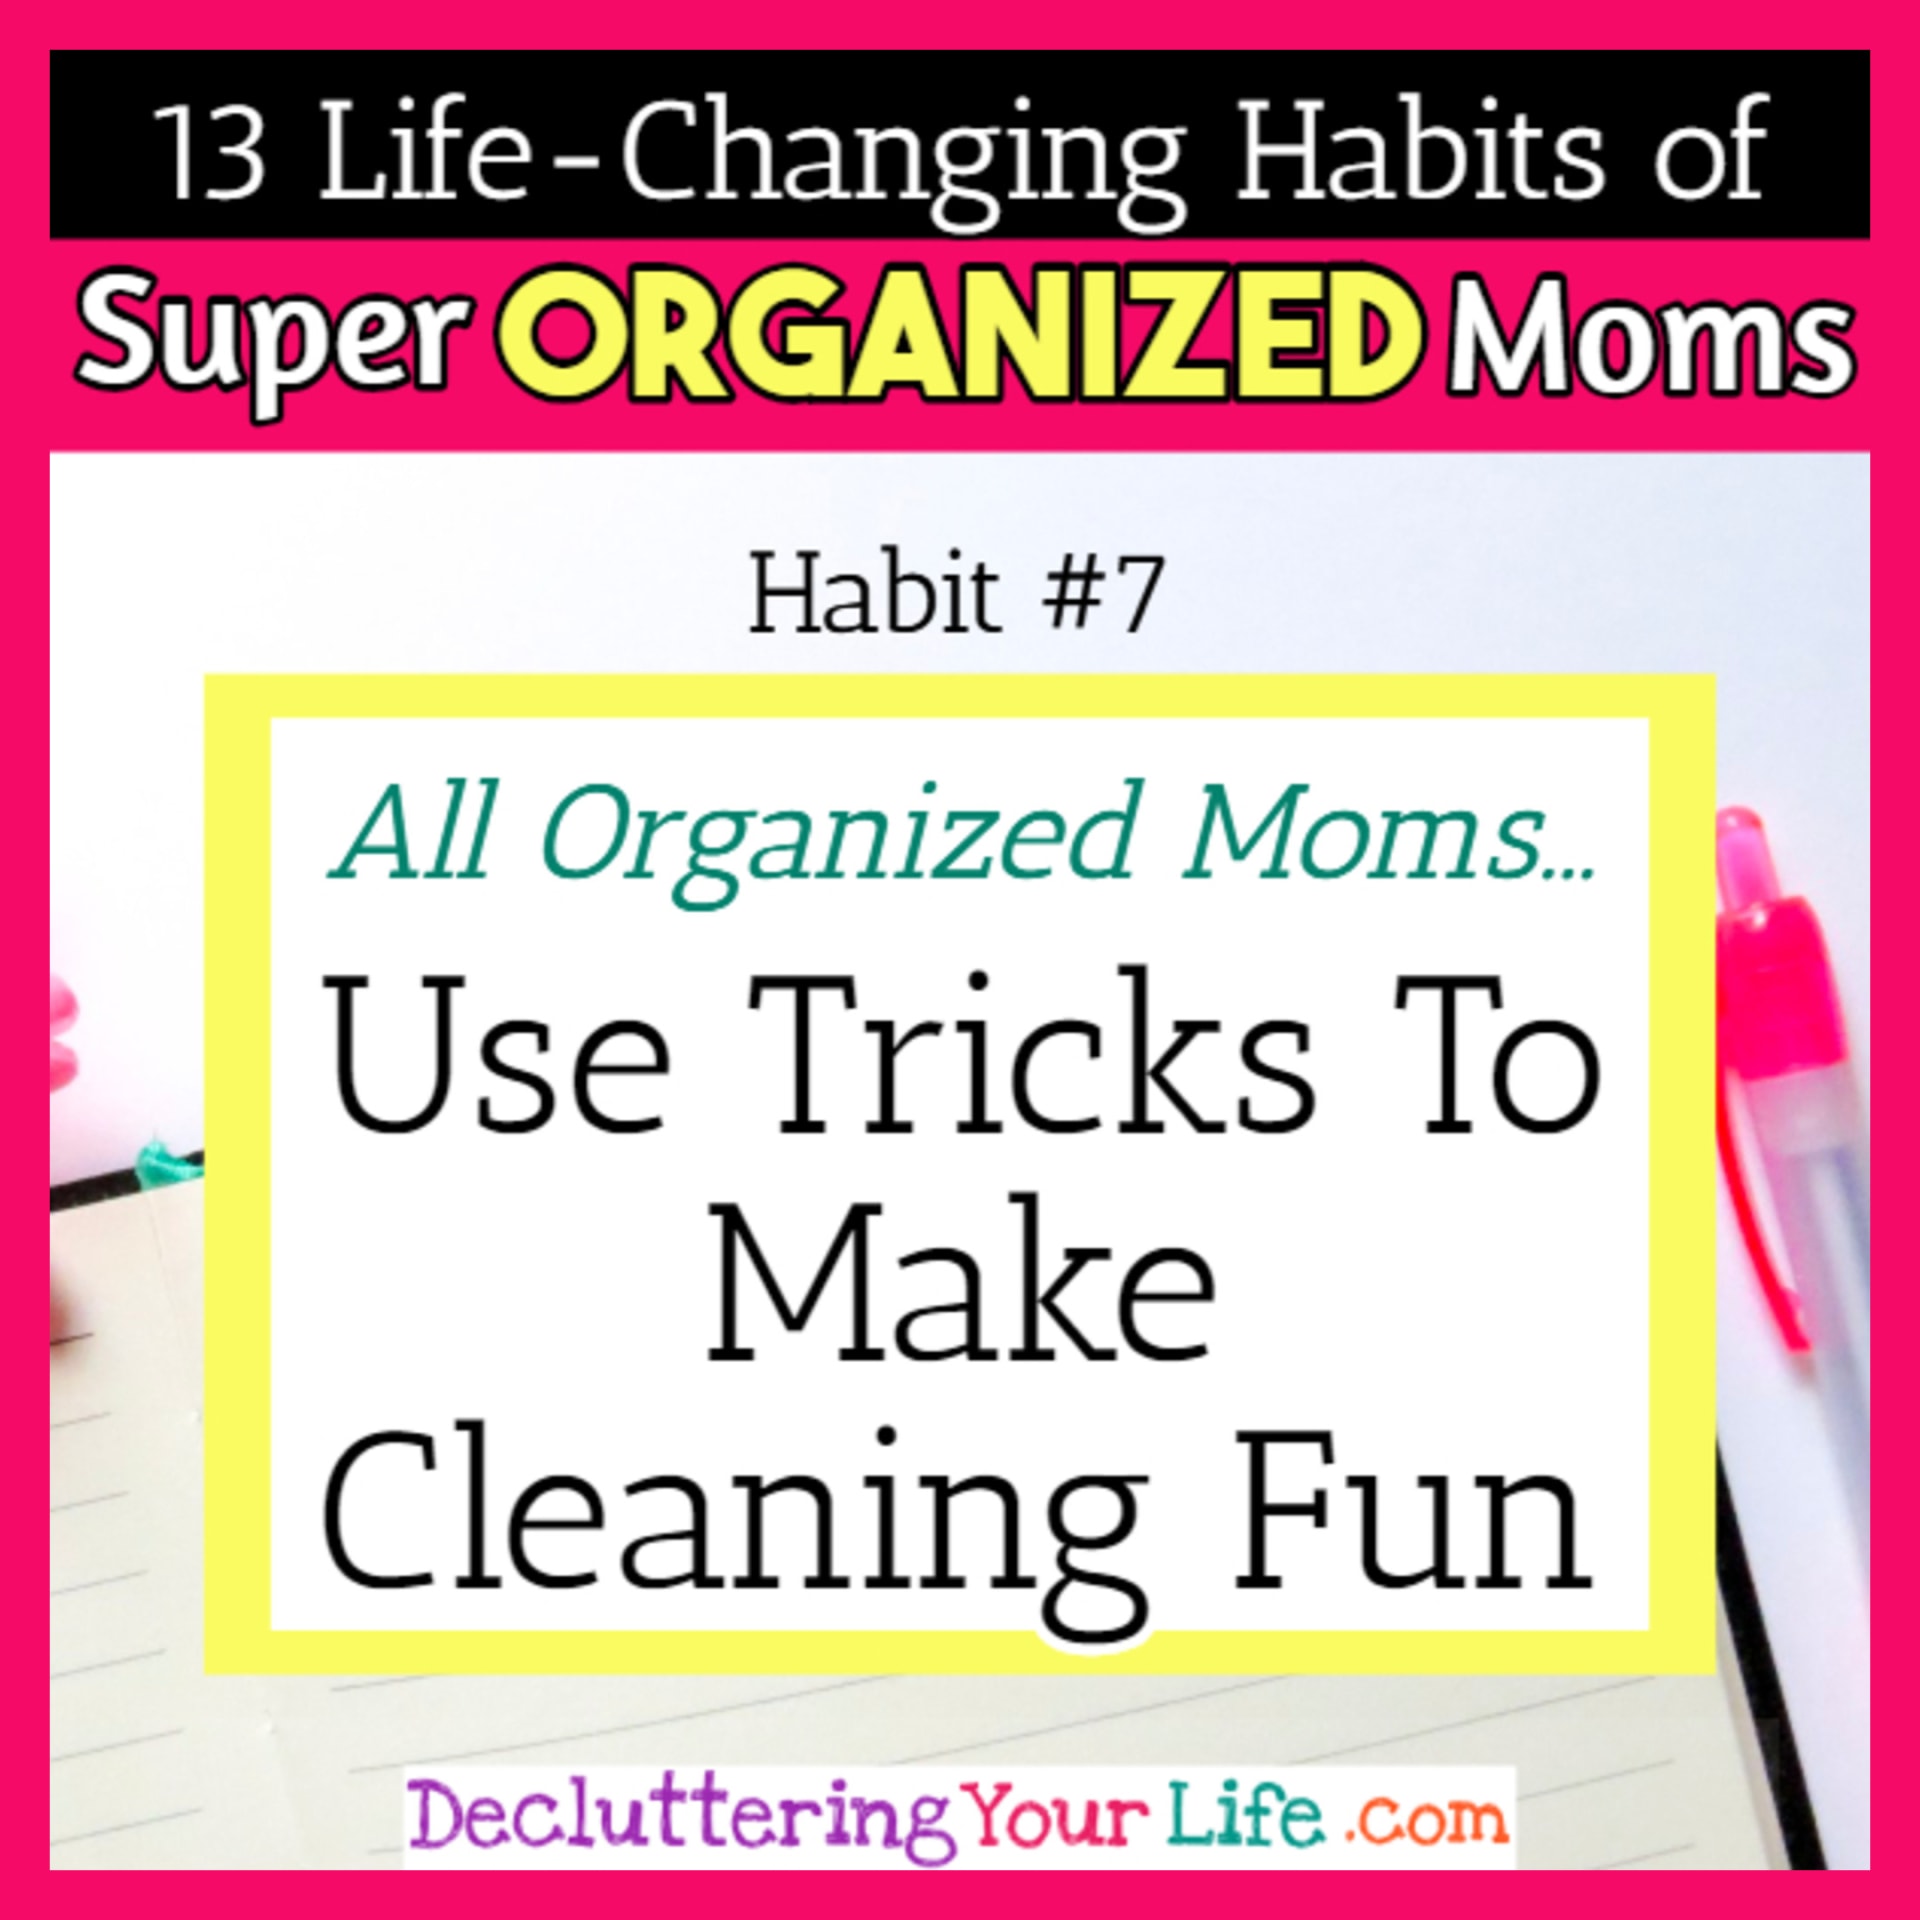 Organized moms know cleaning hacks, tips and tricks to make house cleaning fun - 13 Habits of Super Organized Mom - How To Be An Organized Mom (whether you work OR stay at home)